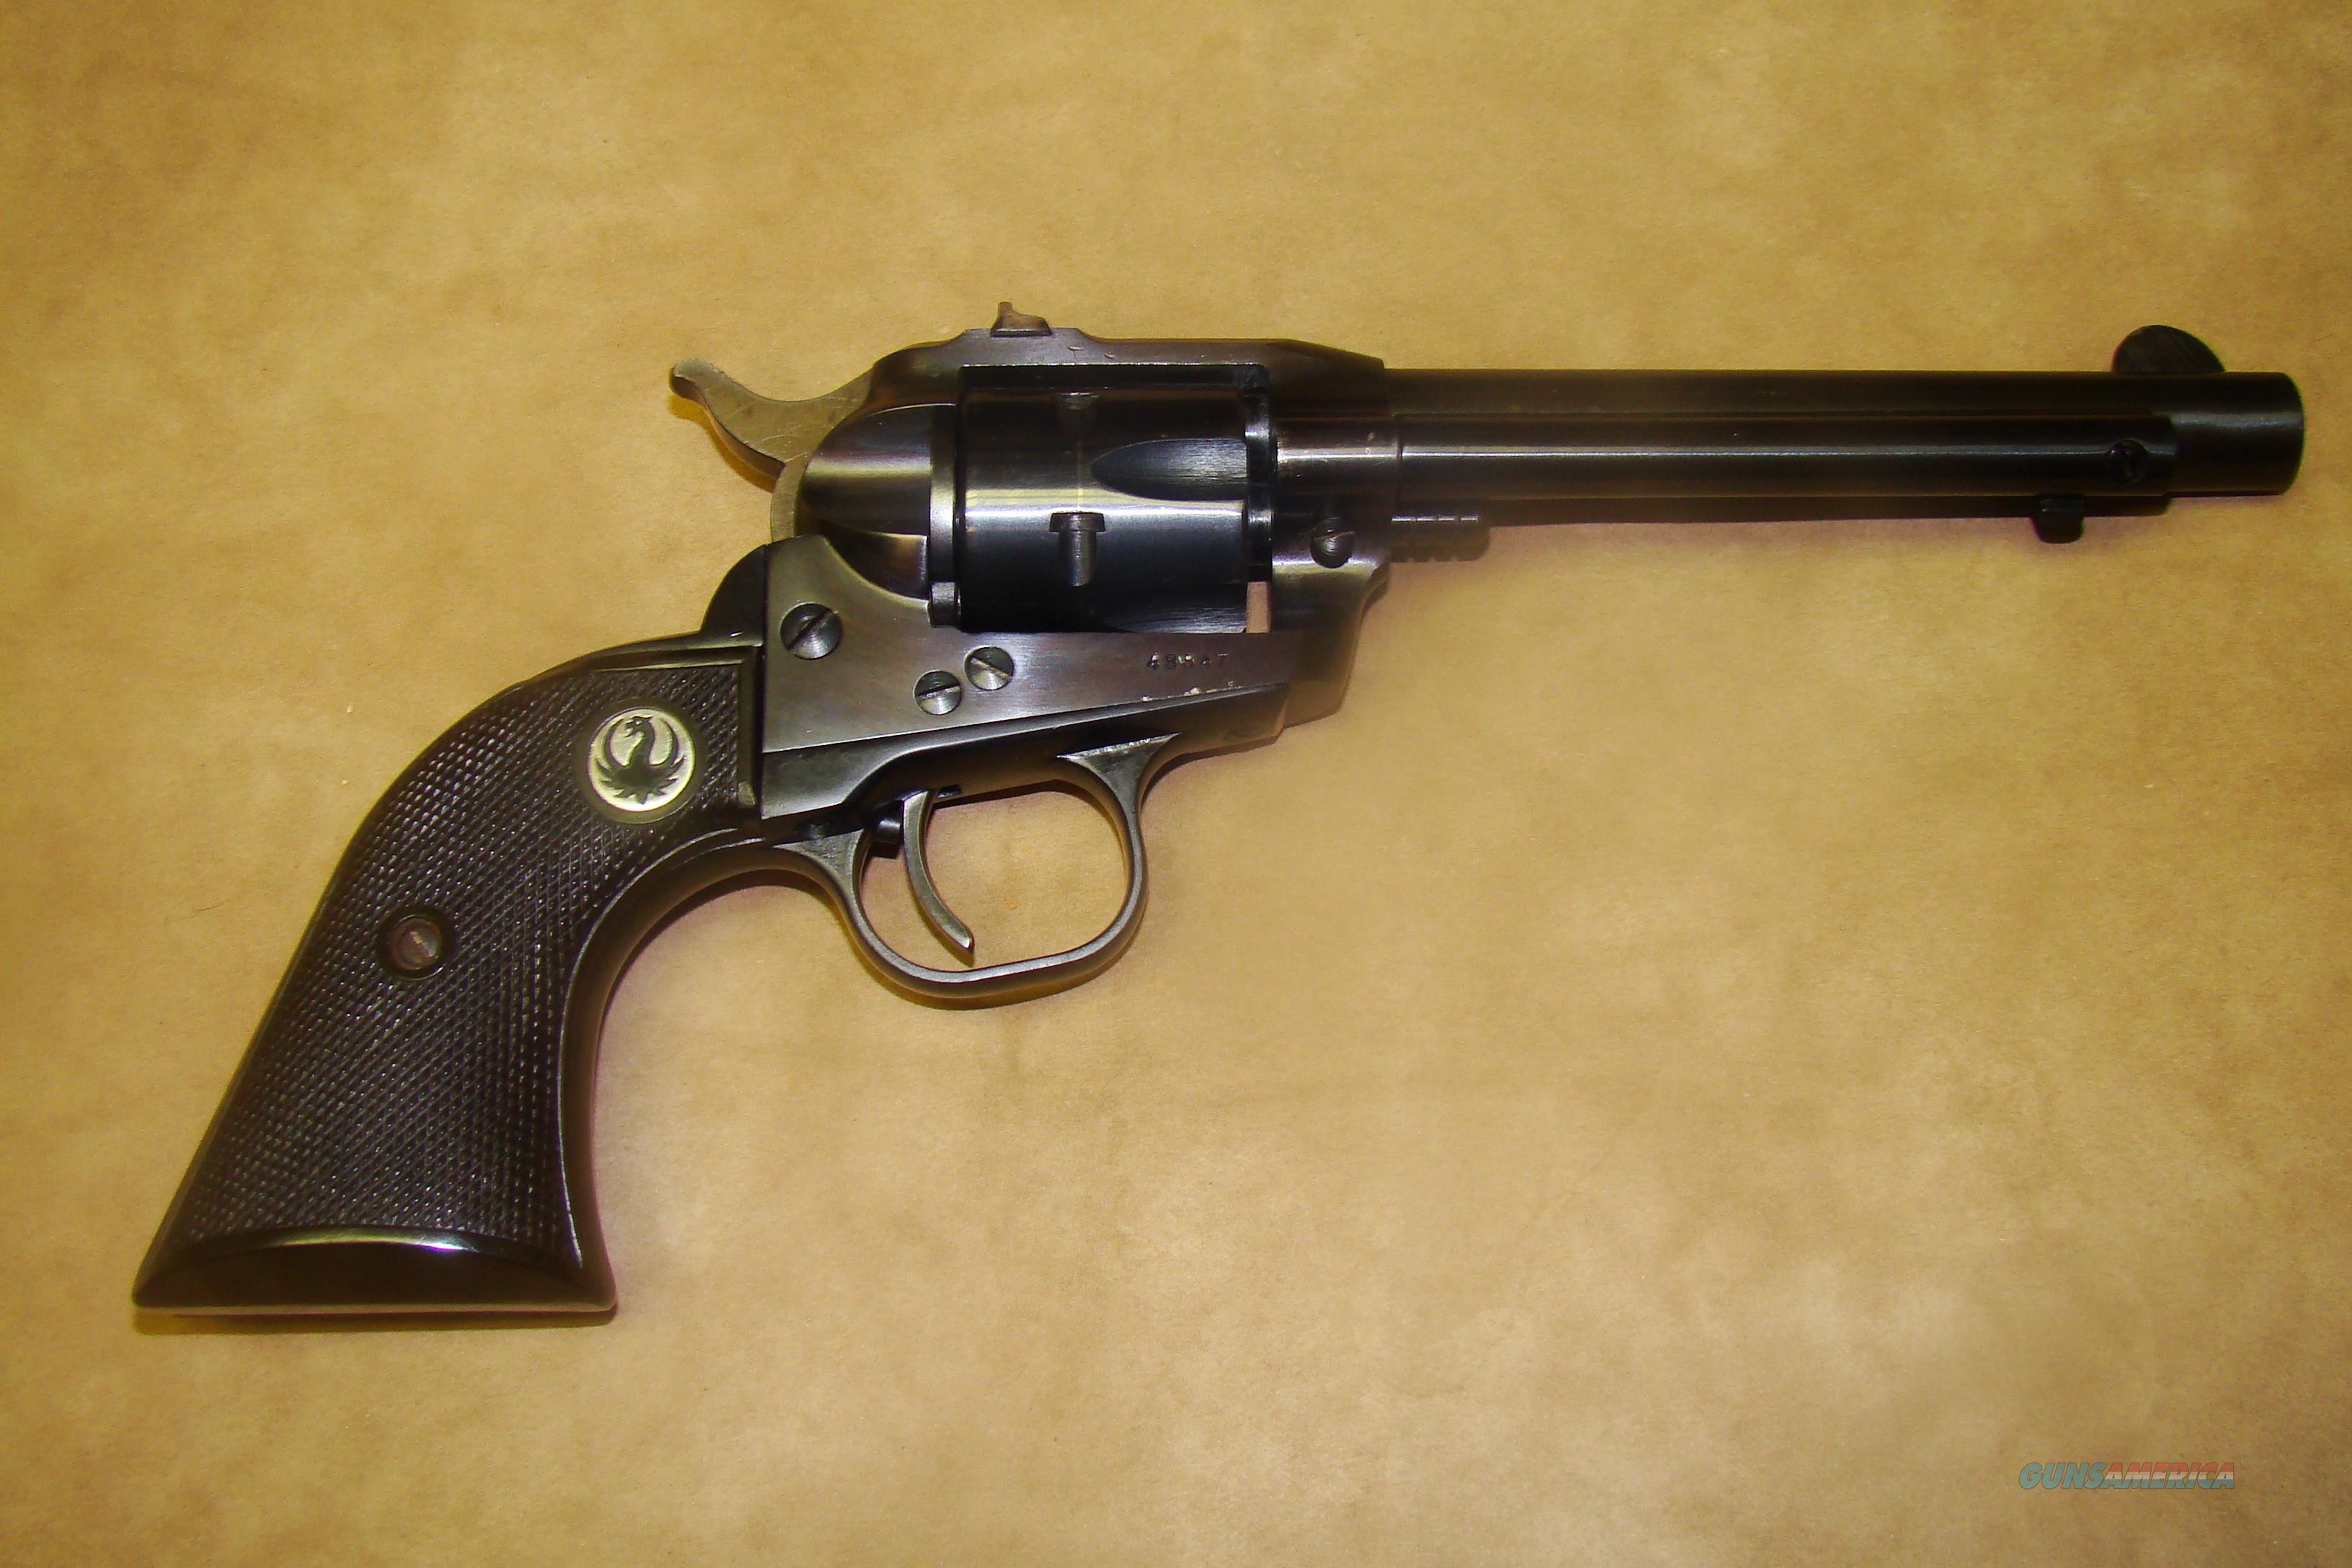 Age of ruger single six